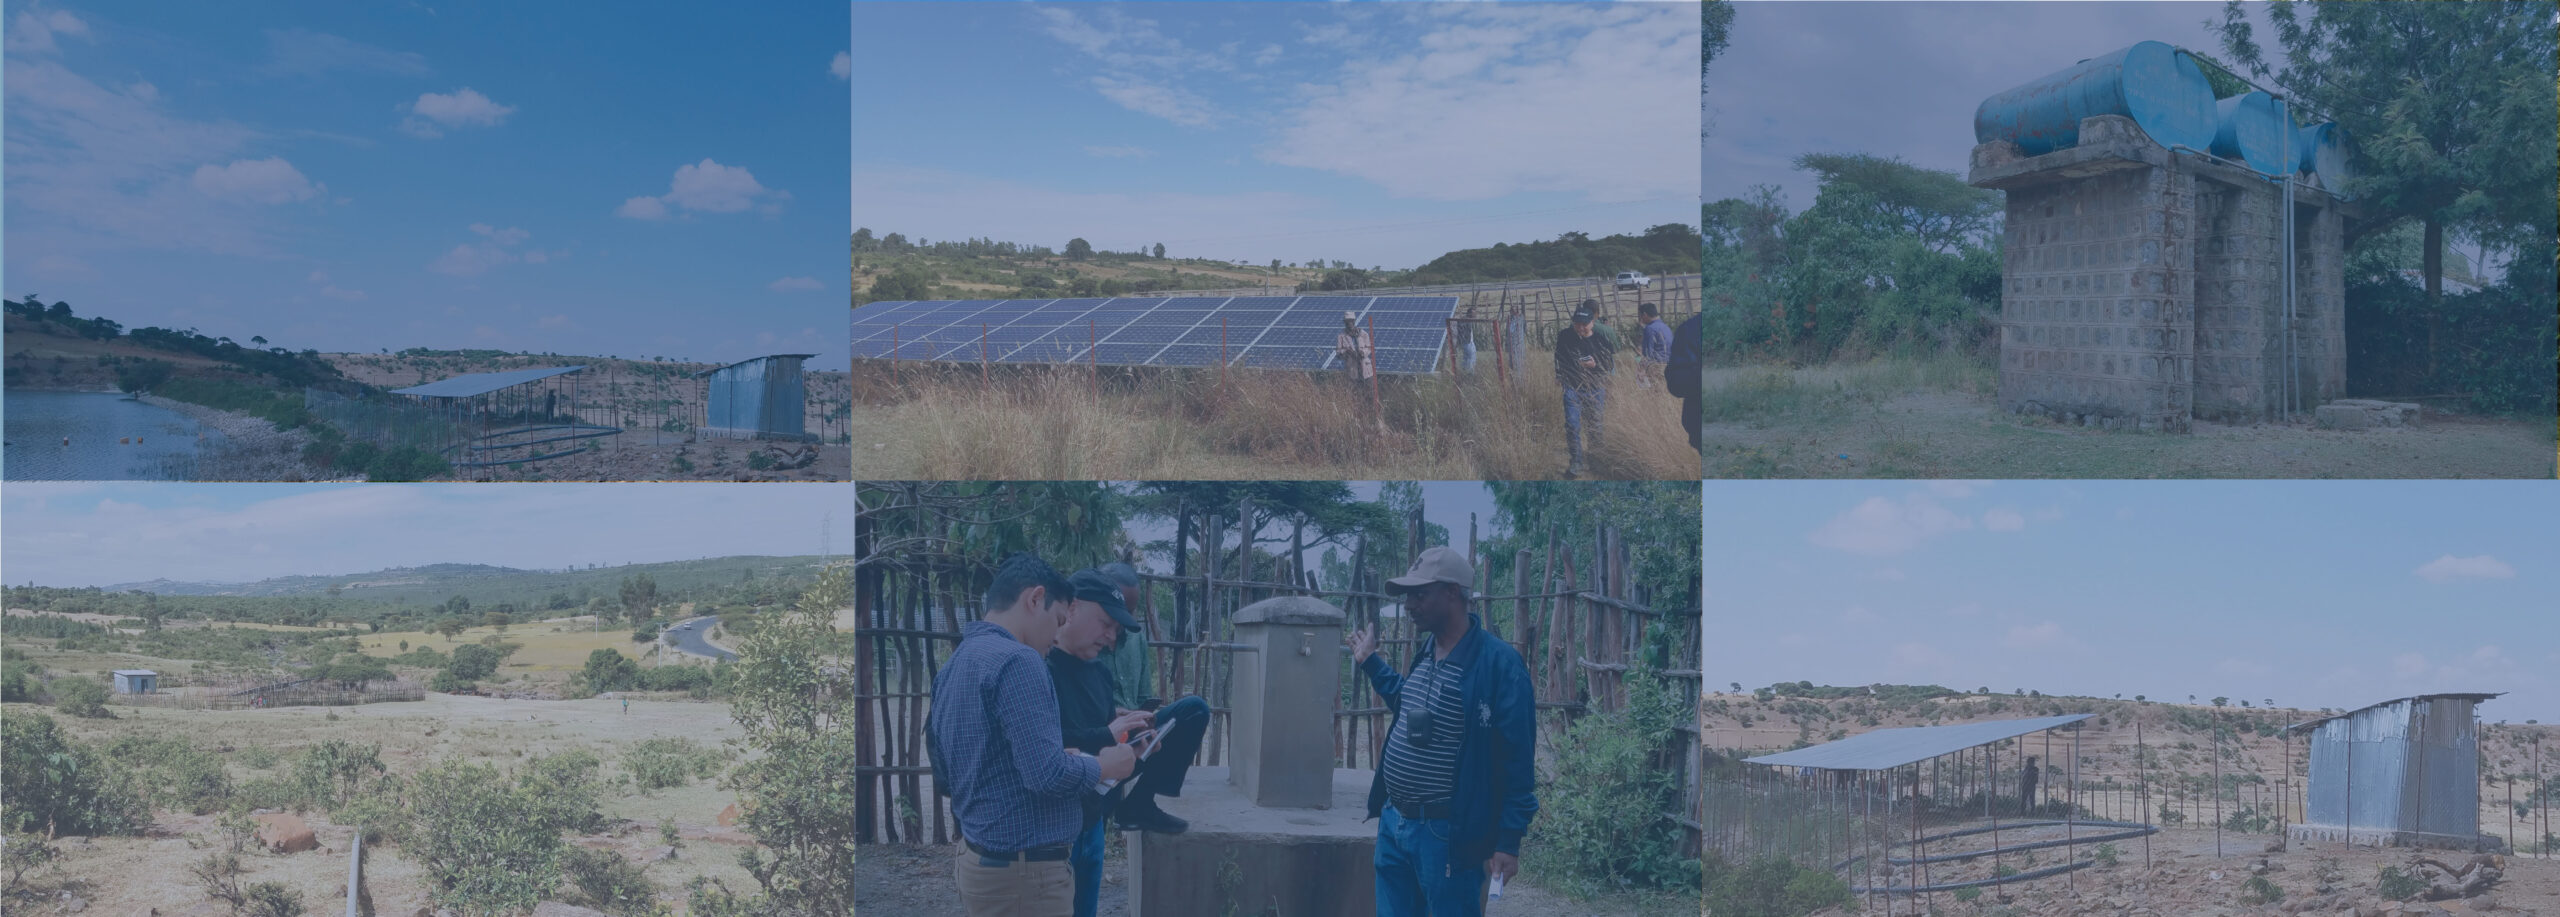 Demonstrating A Scalable Revenue Model for Community Solar Water Pumping in Ethiopia